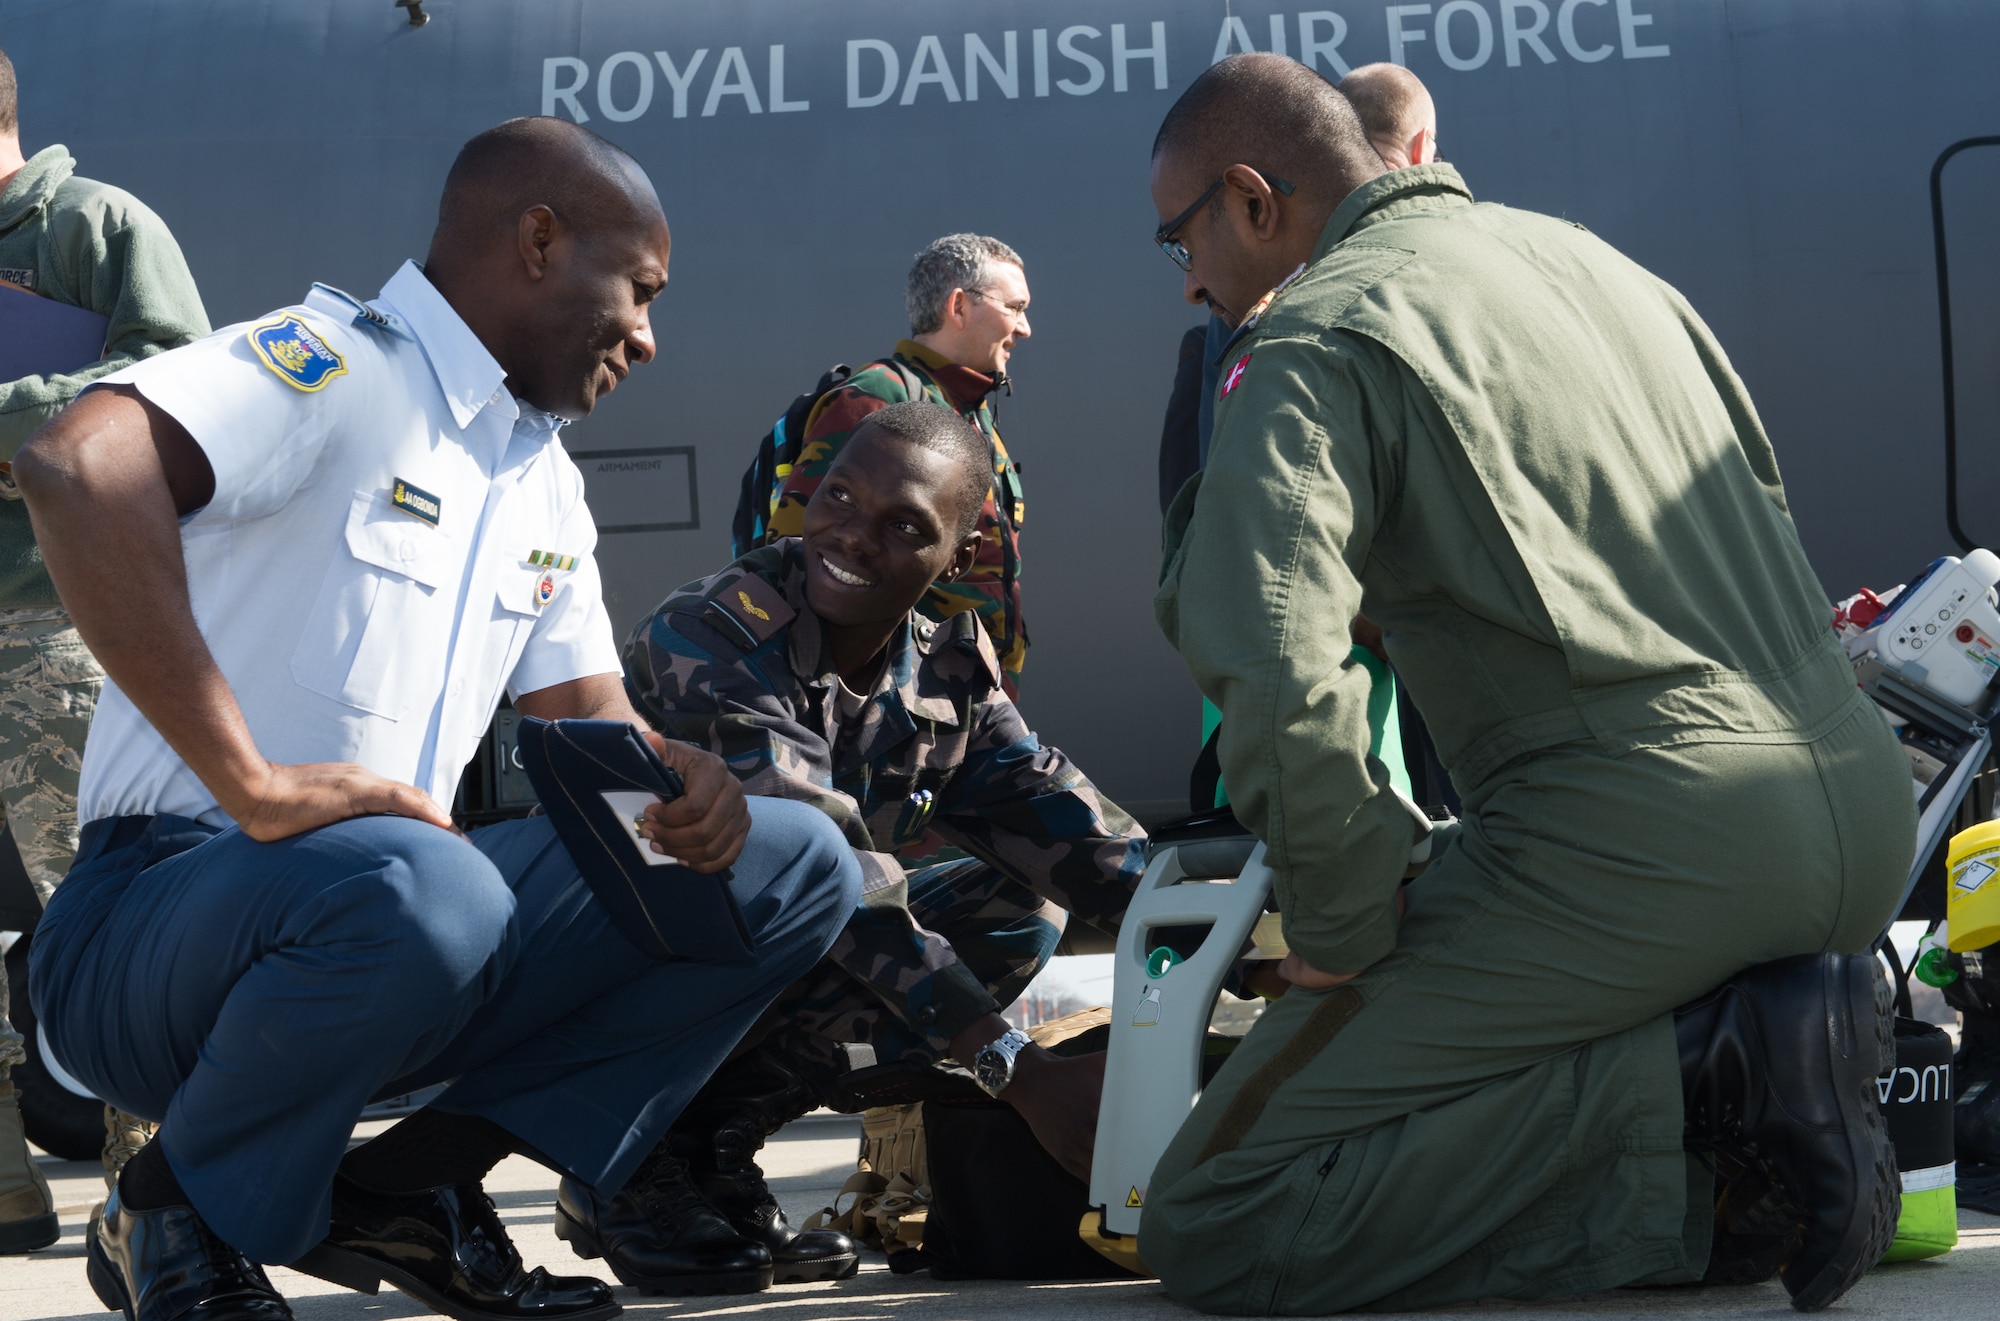 Two Nigerian air force and a Royal Danish air force airmen discuss medical evacuation equipment during a tour of a Danish C-130J Super Hercules at Ramstein Air Base, Germany, March 11, 2015. The Royal Danish Air Force showcased their aeromedical evacuation capabilities used for the transfer of Ebola patients during the 30th Ramstein Aerospace Medicine Summit and NATO Science and Technology Organization Technical Course. (U.S. Air Force photo/Staff Sgt. Armando A. Schwier-Morales) 